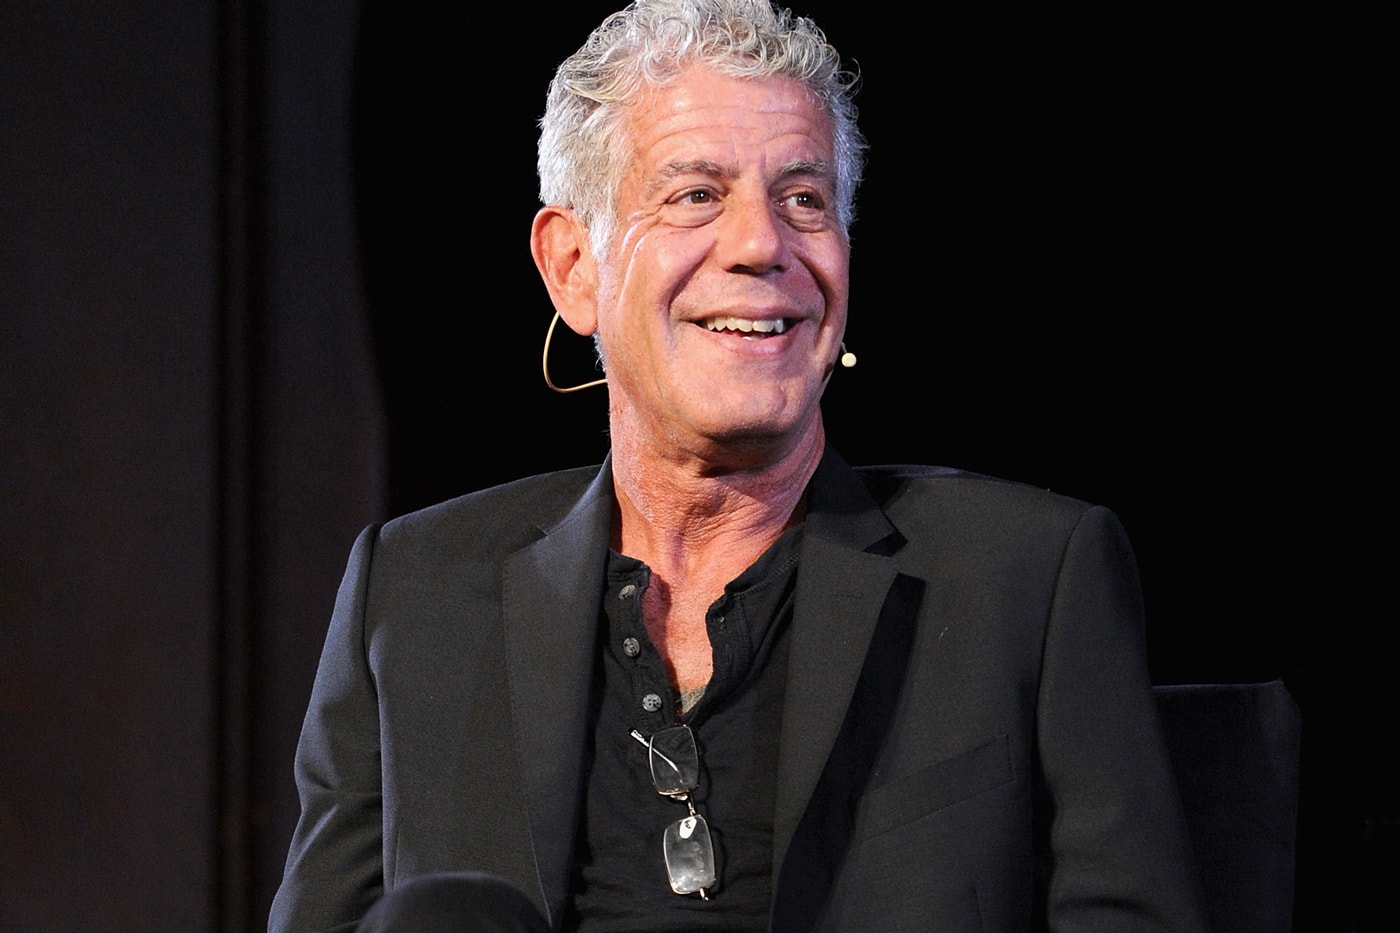 Anthony Bourdain Creative Arts Emmy Awards Posthumous Win Outstanding Informational Series Special and Writing for a Nonfiction Program CNN